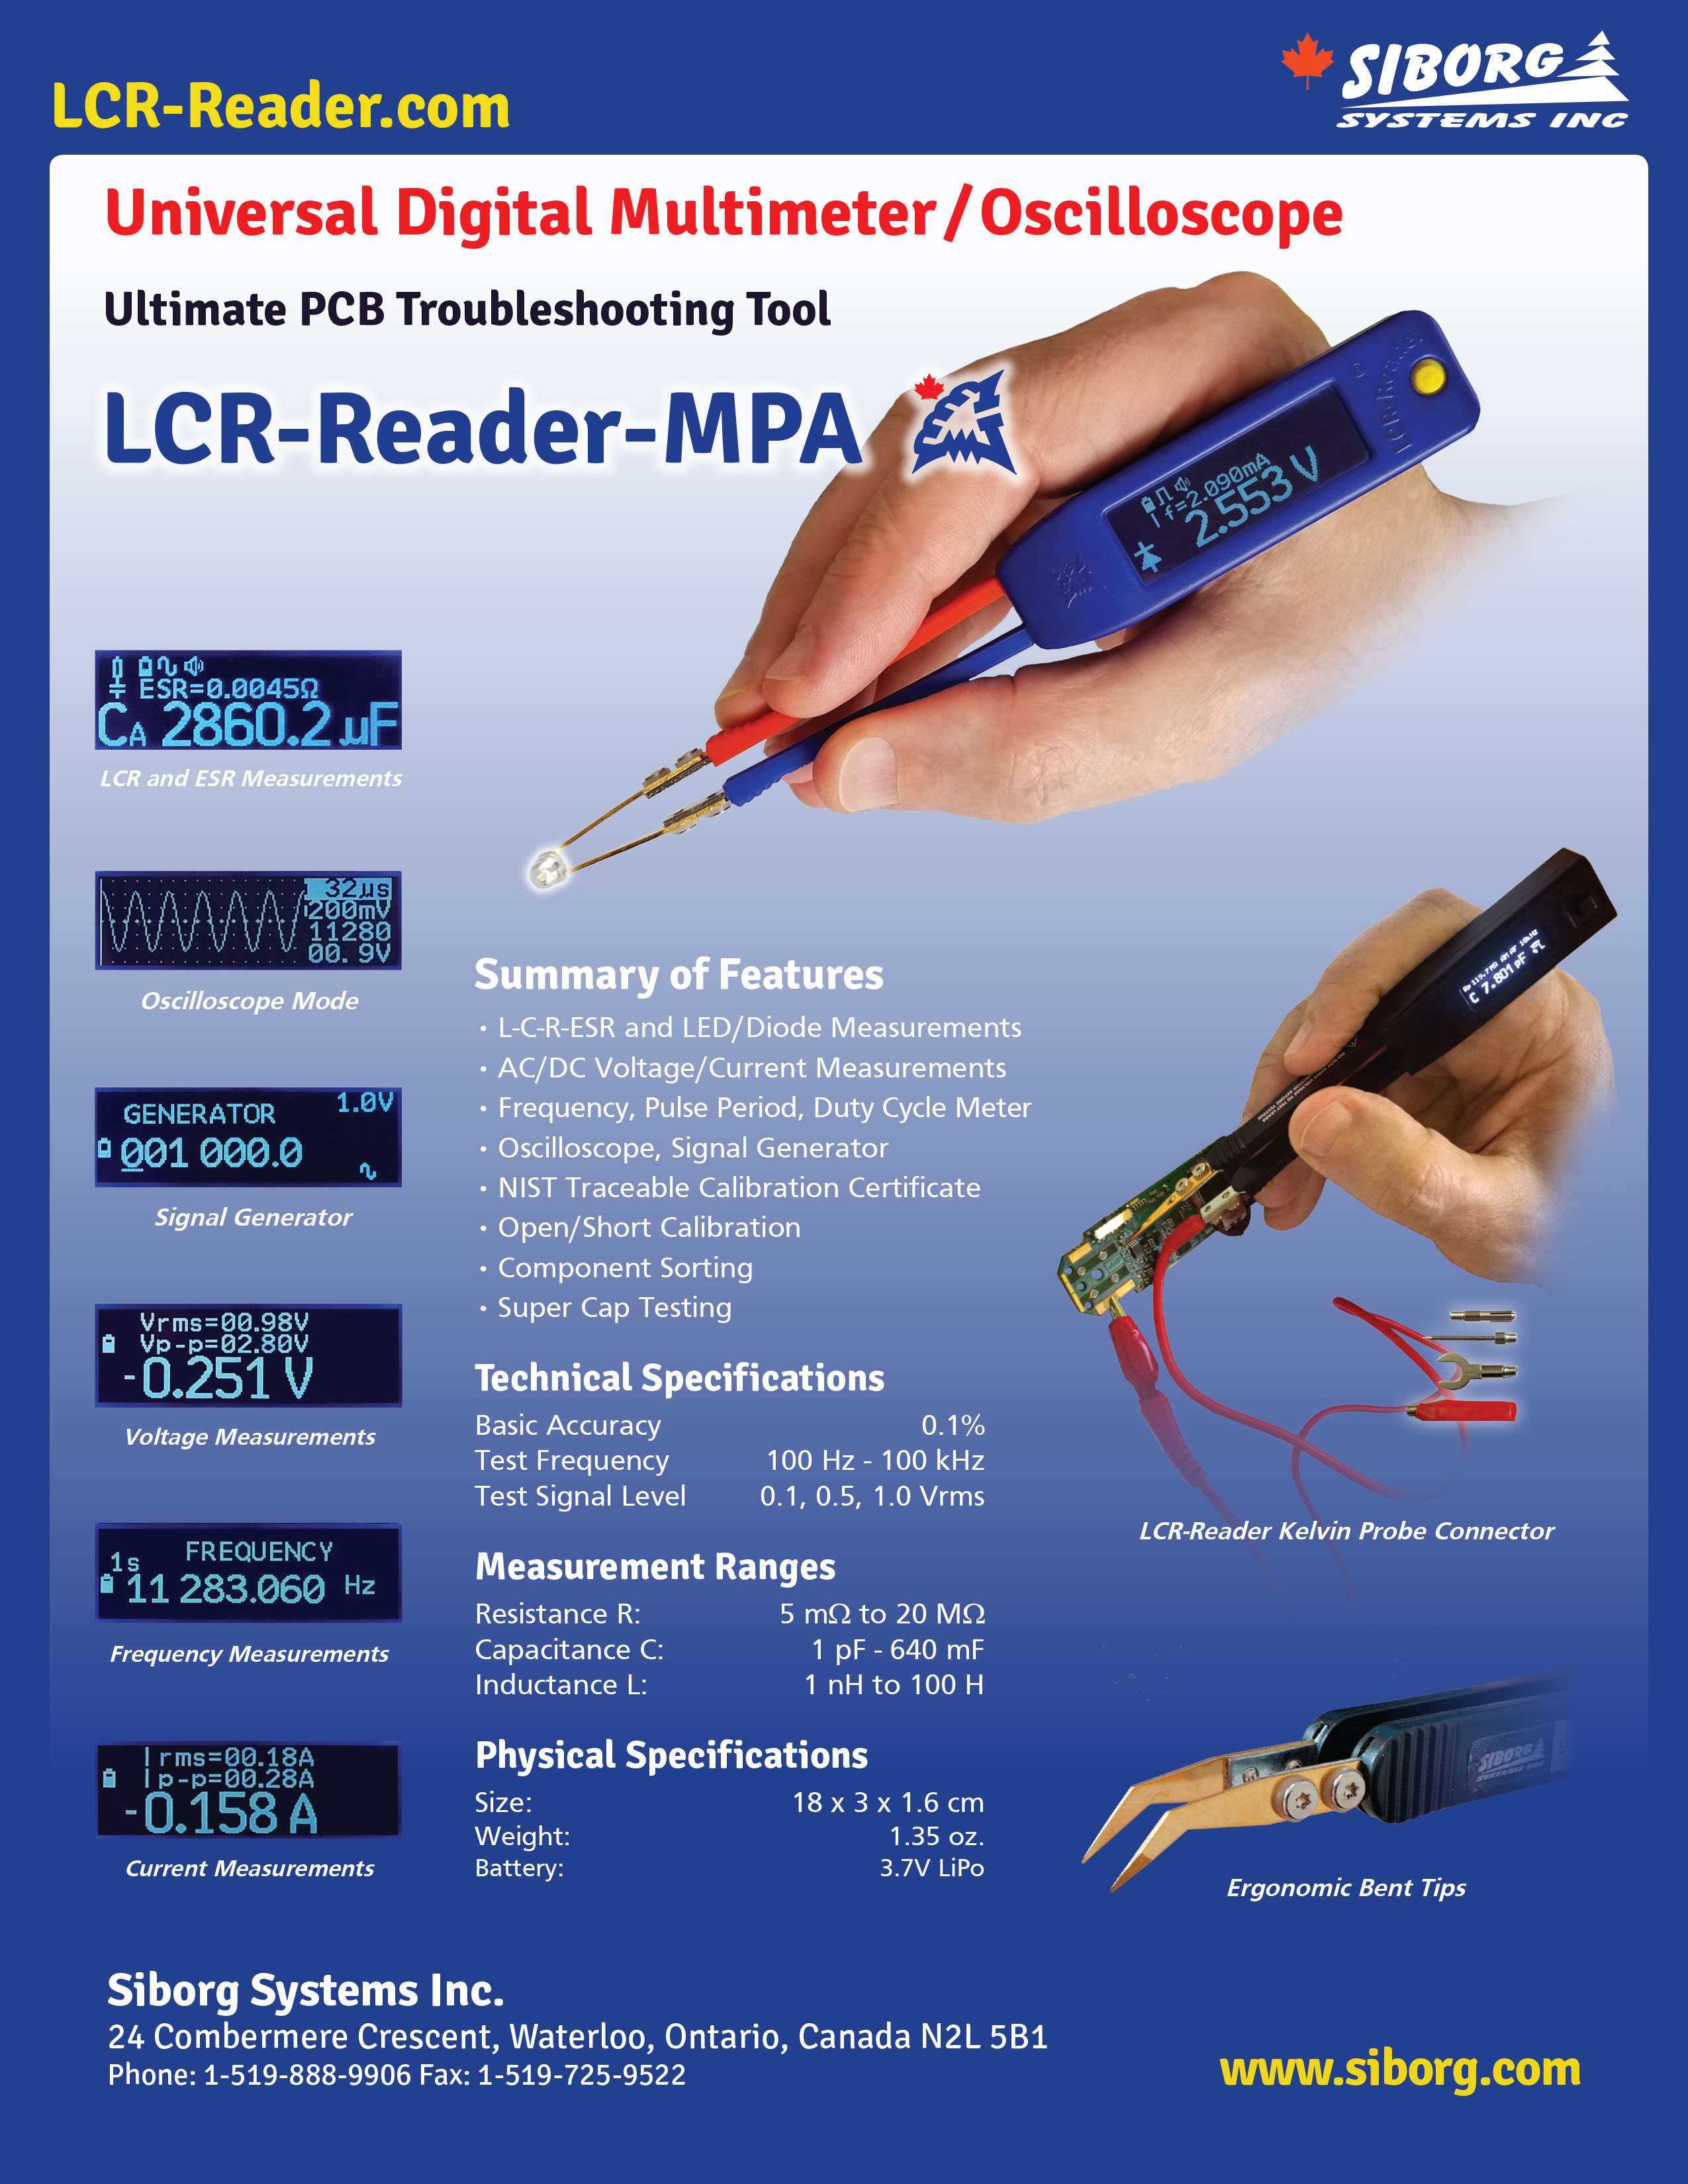 LCR-Reader-MPA flier with features and specs